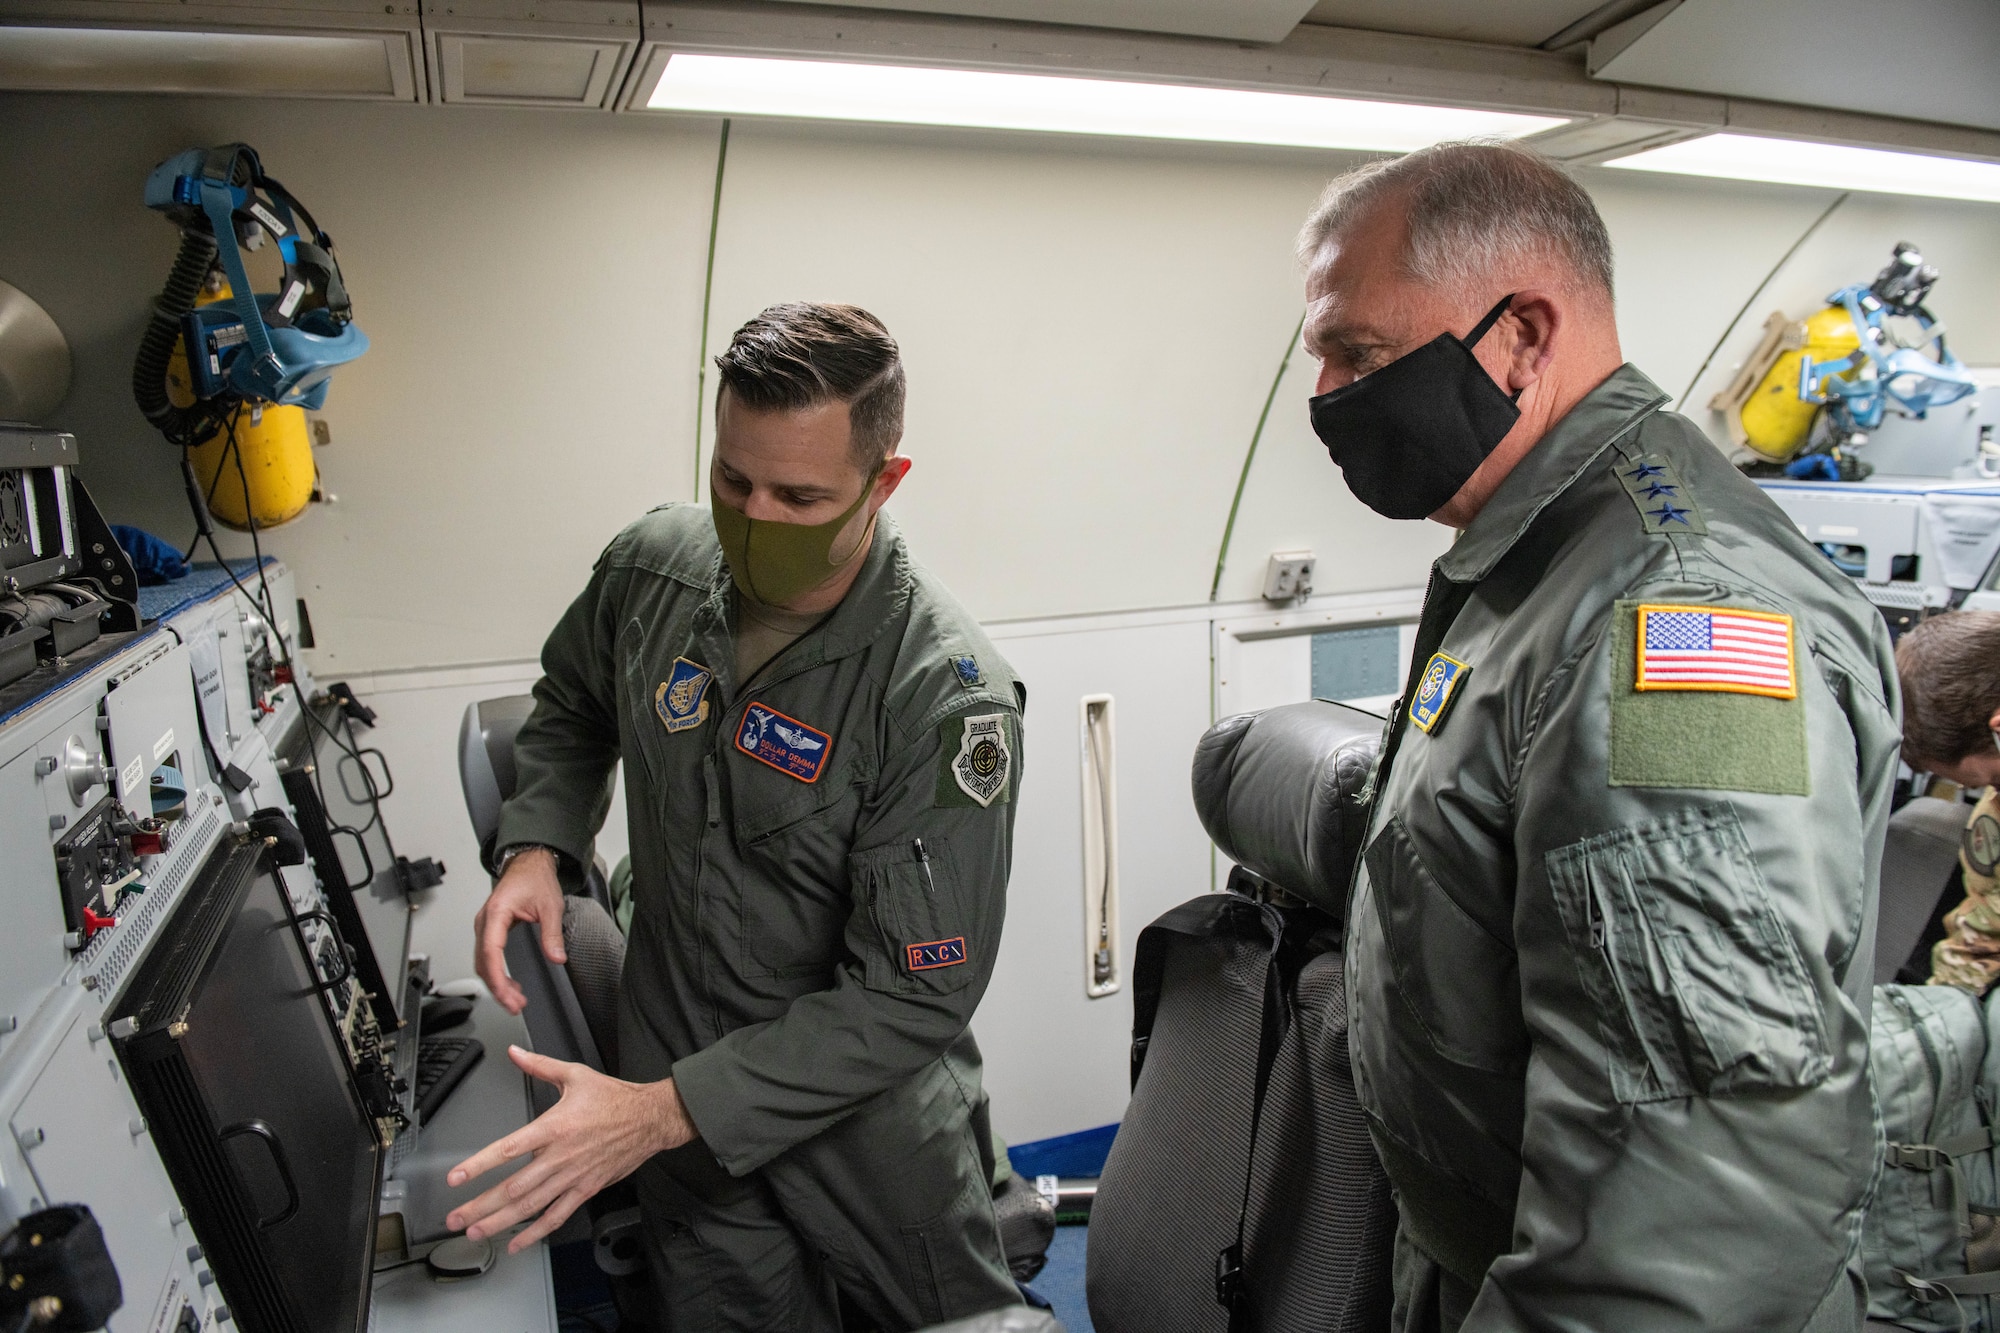 A military member shows a general a new system on board a plane